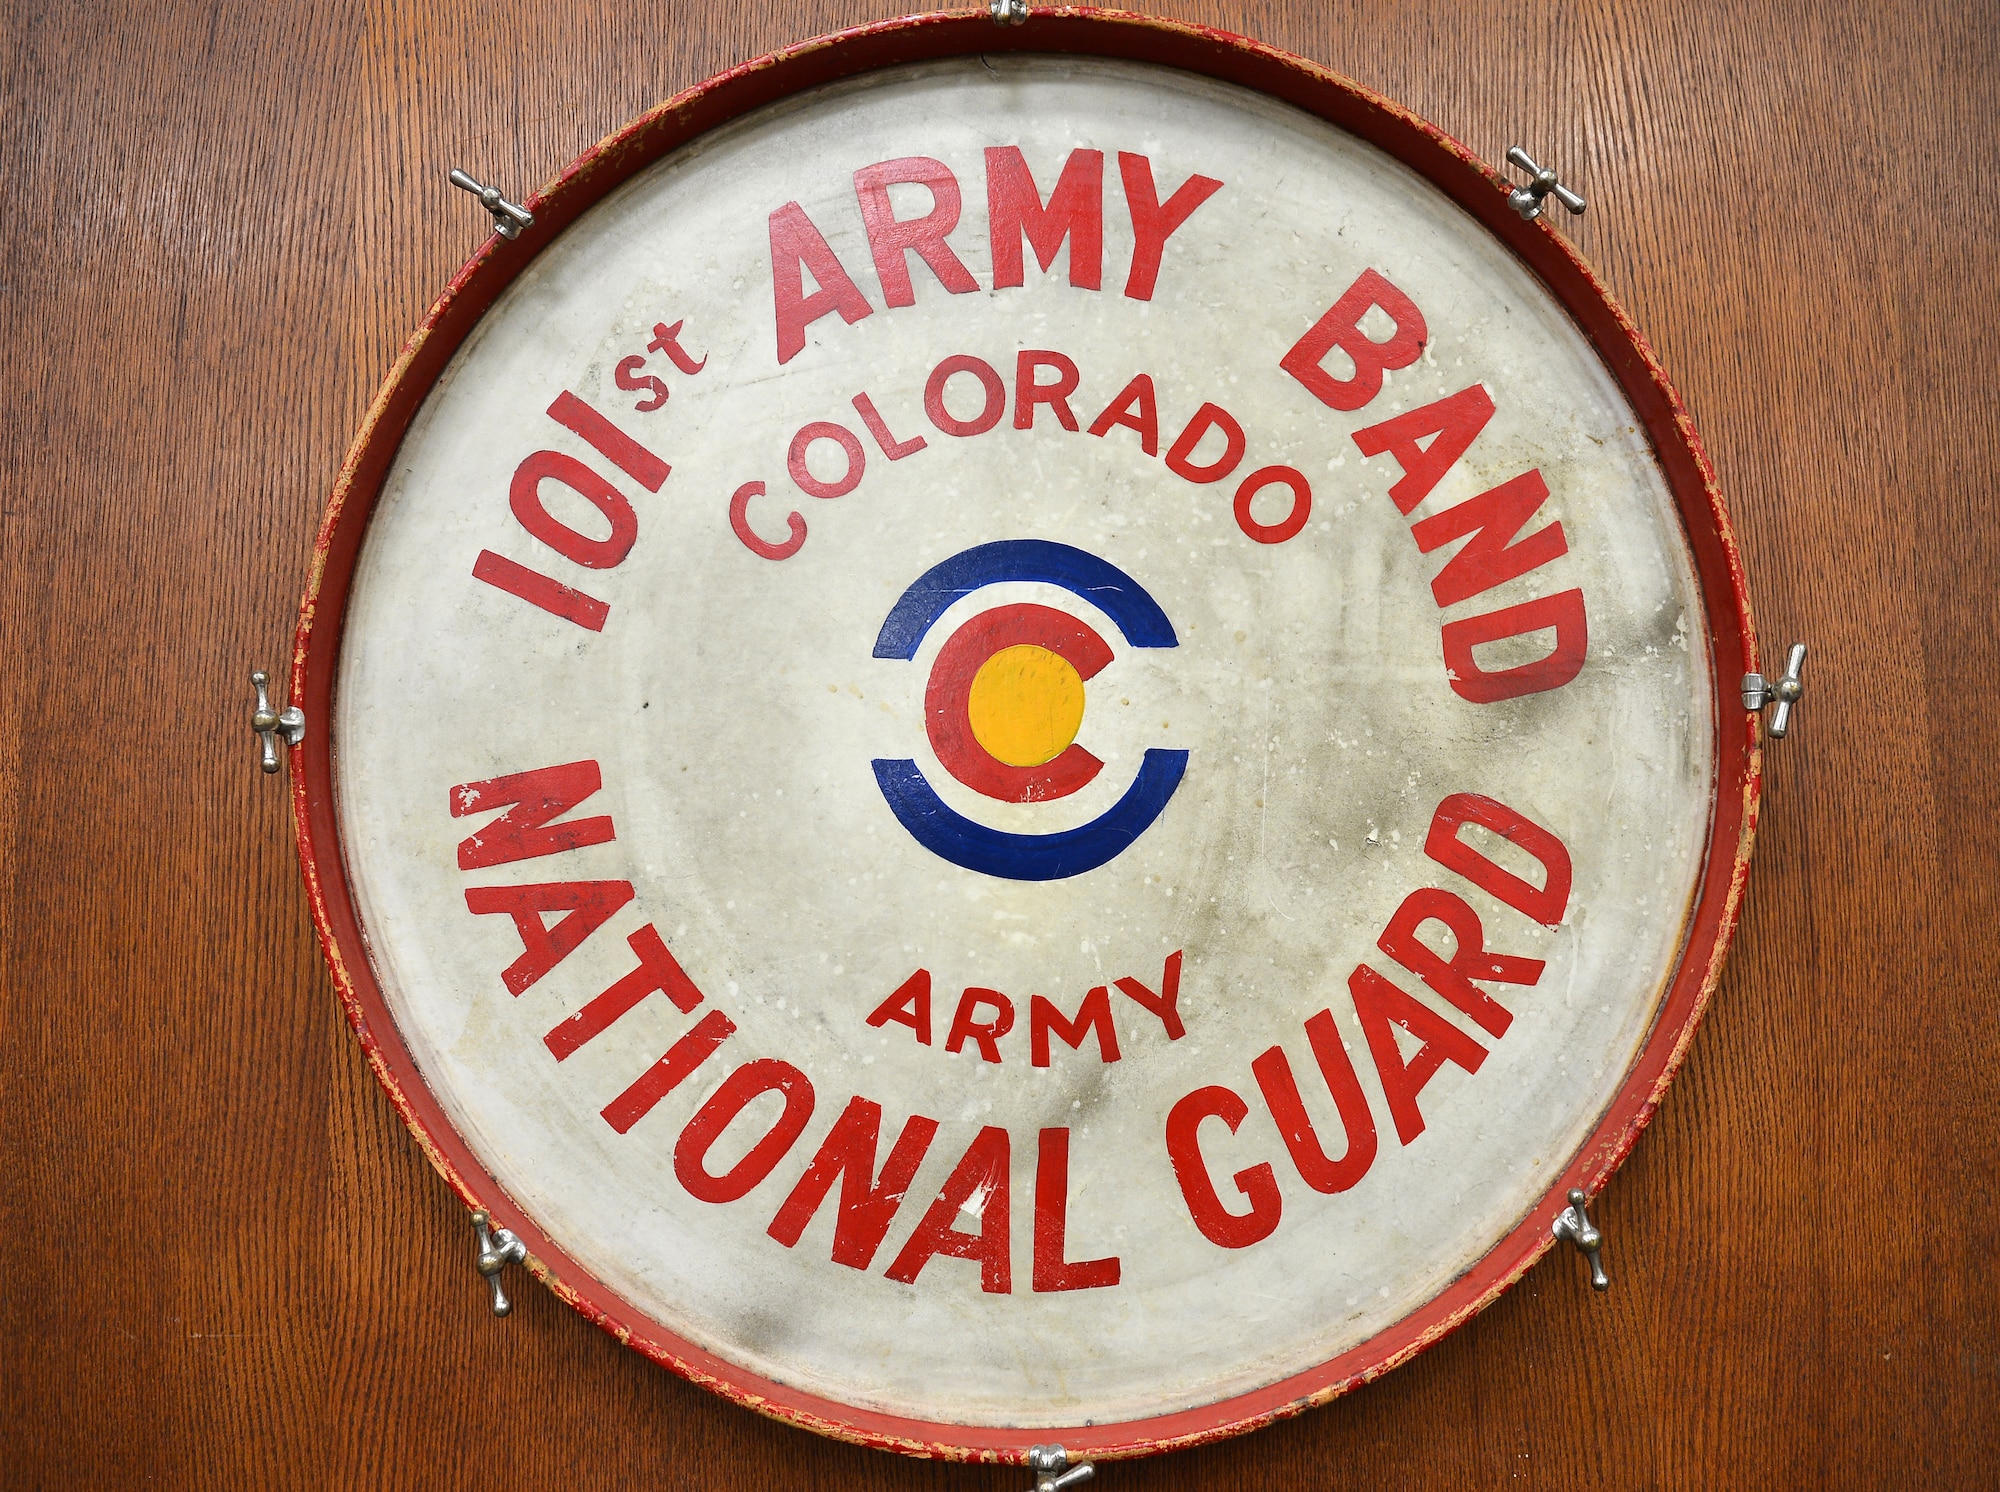 For the past 77 years, the Colorado Army National Guard 101st Army Band has been serving the state’s military and civilian community through the tradition of musical performance. The band’s mission statement is to provide music throughout the spectrum of federal and state military operations and instill in soldiers the will to fight and win, foster the support of our citizens, and promote our national interests at home and abroad.